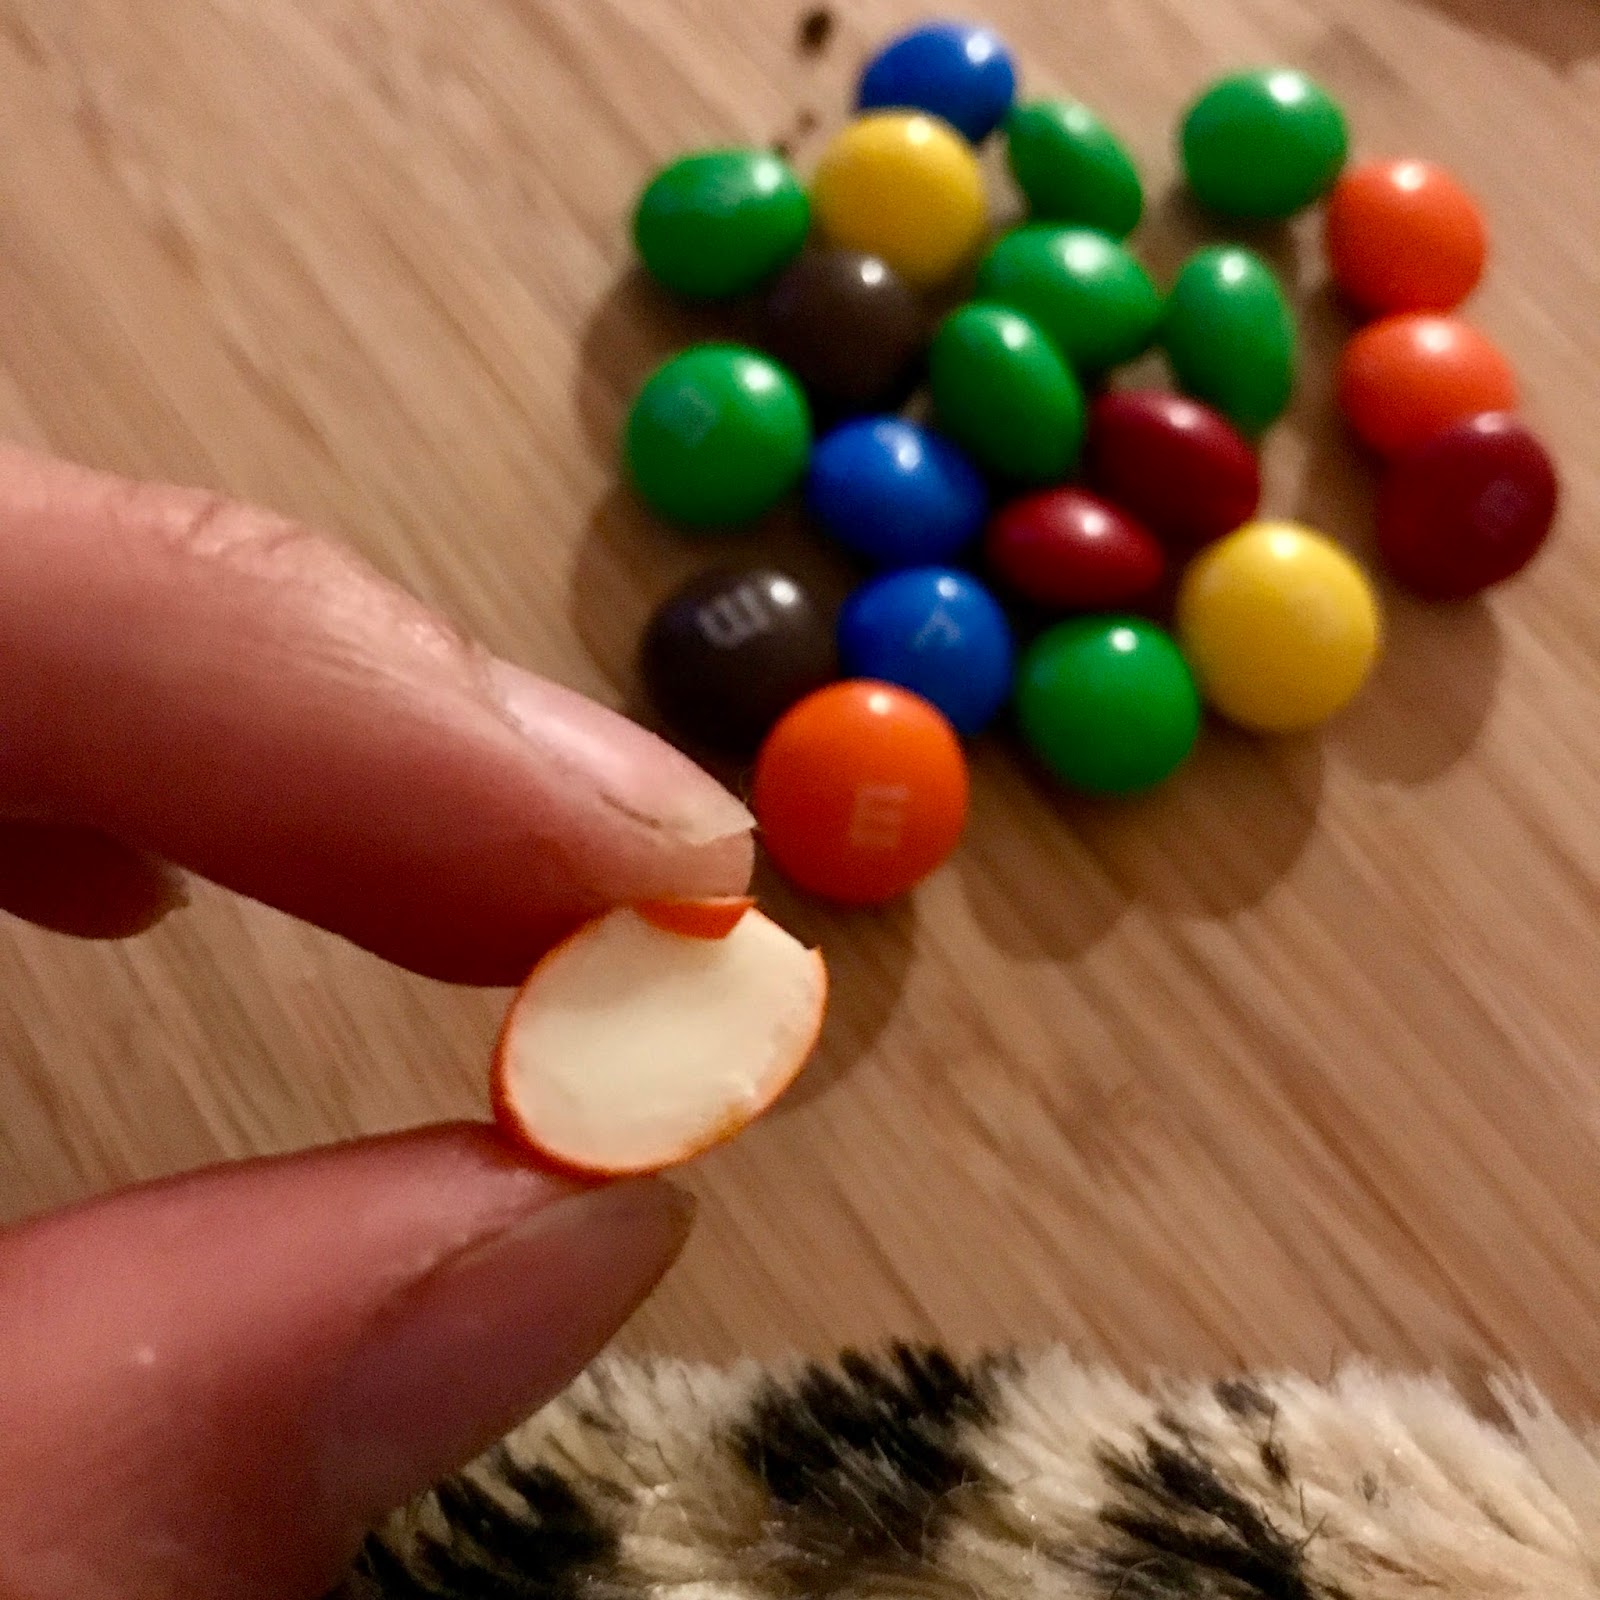 white chocolate m&ms review